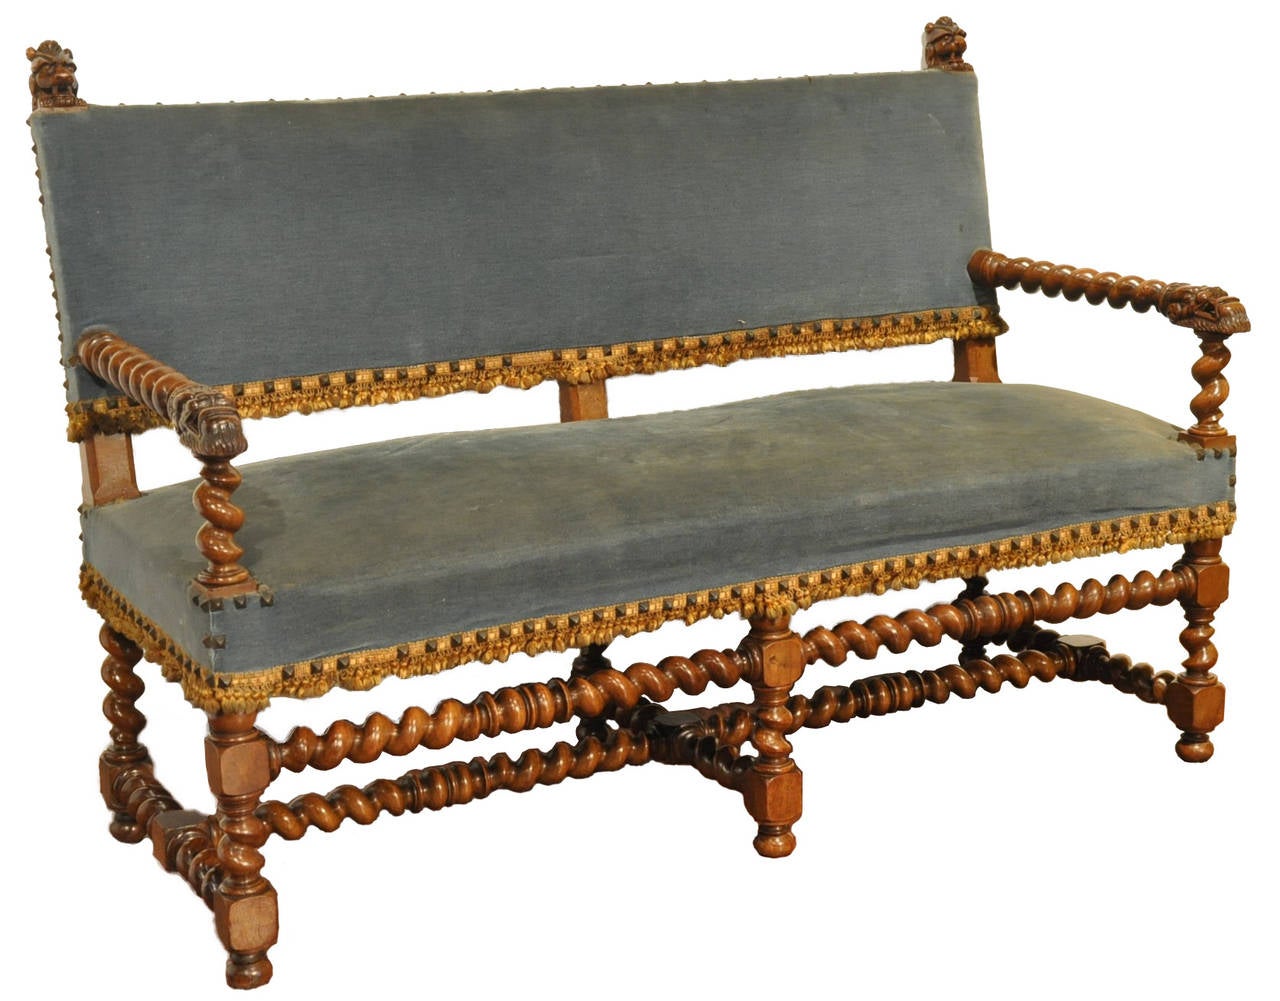 19th century walnut Louis 13 barley twist settee with lion heads on armrests and back (c:1860). Beautiful patina.